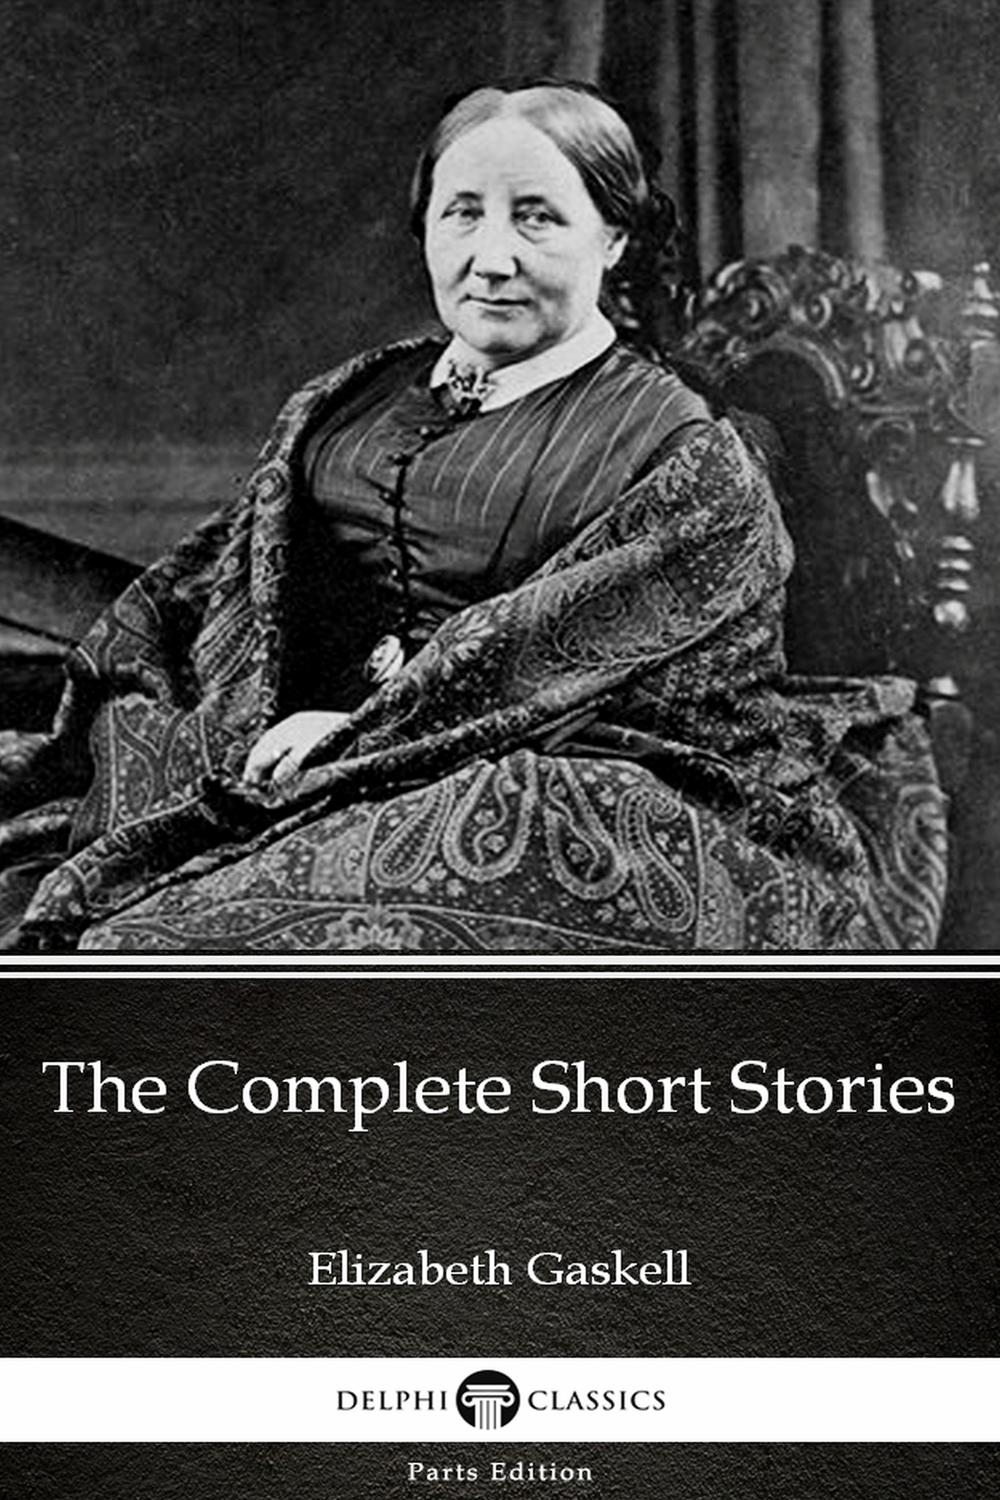 The Complete Short Stories by Elizabeth Gaskell - Delphi Classics (Illustrated) - Elizabeth Gaskell, Delphi Classics